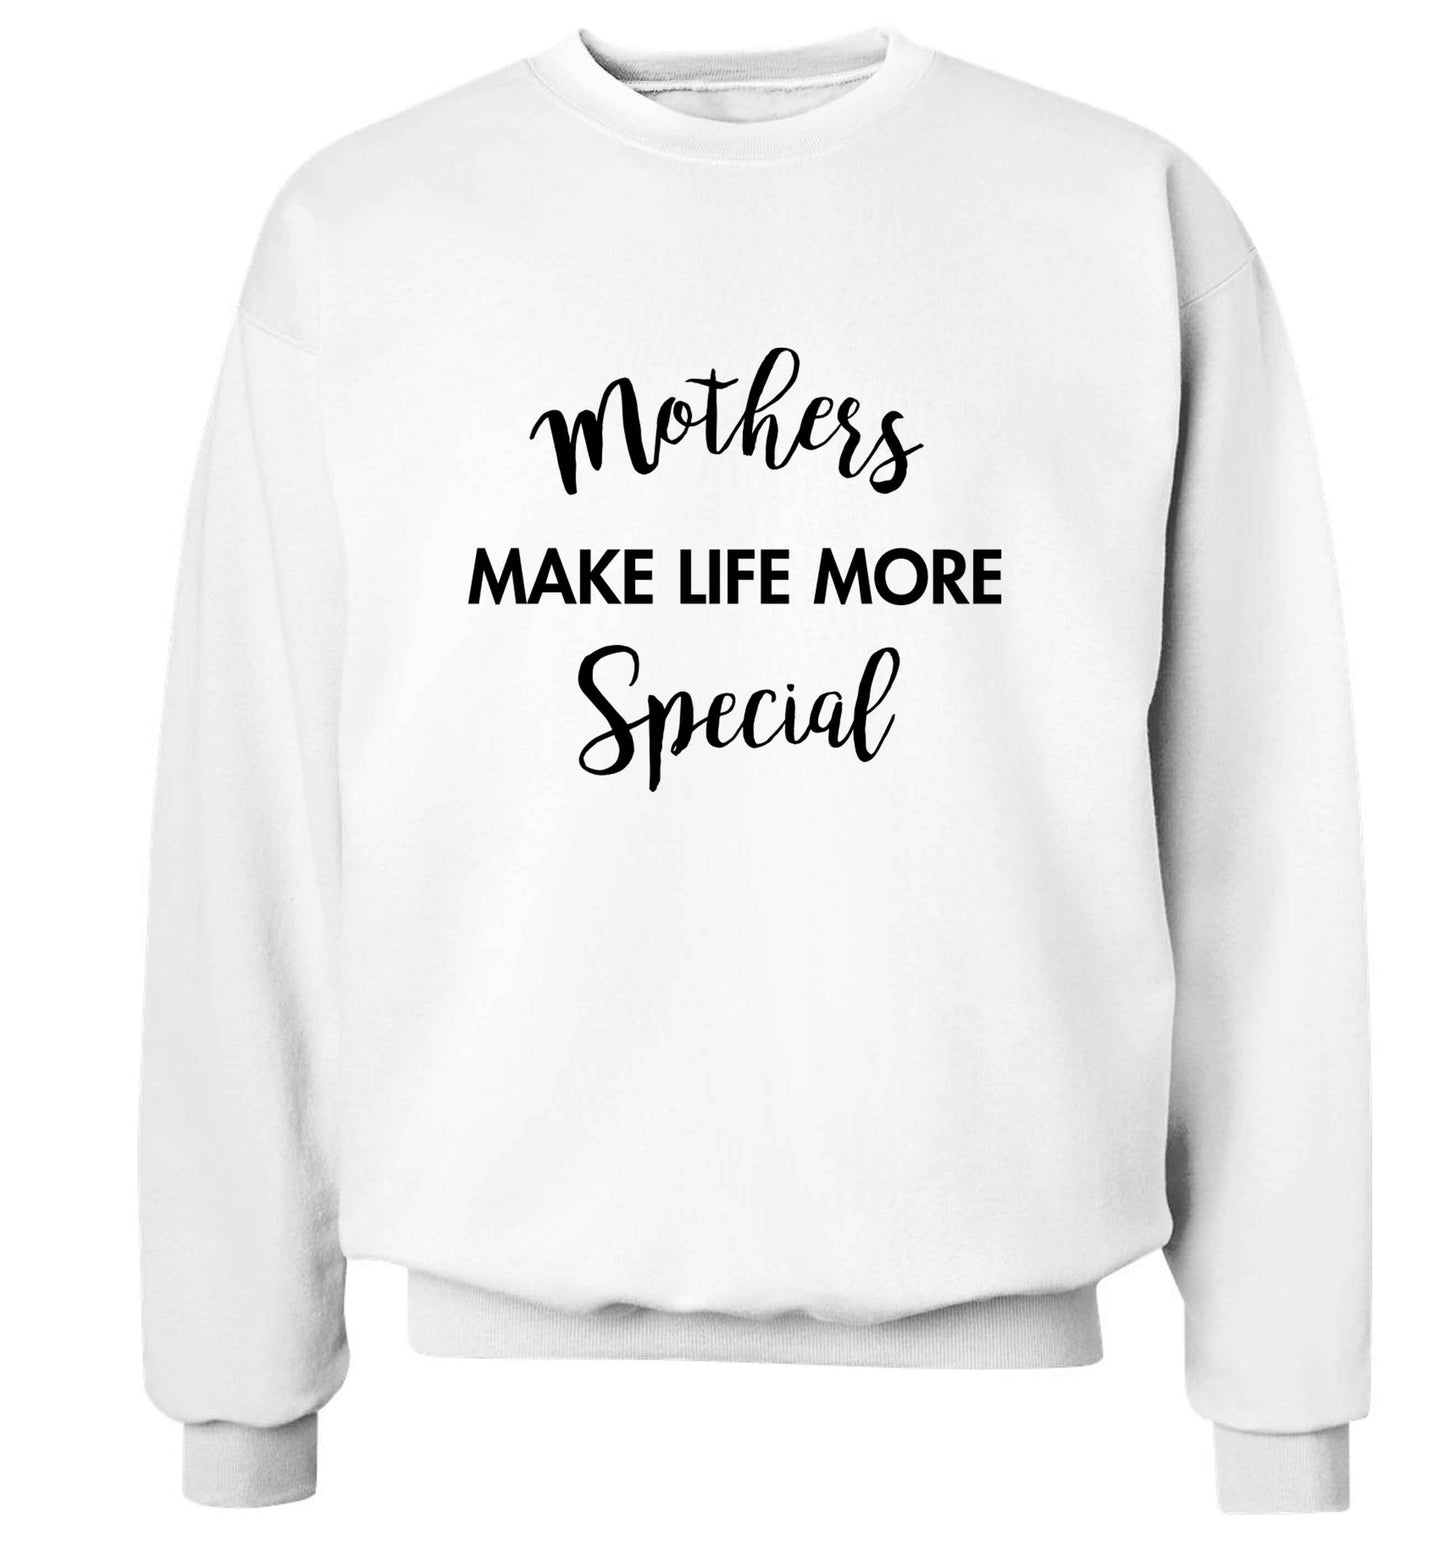 Mother's make life more special adult's unisex white sweater 2XL